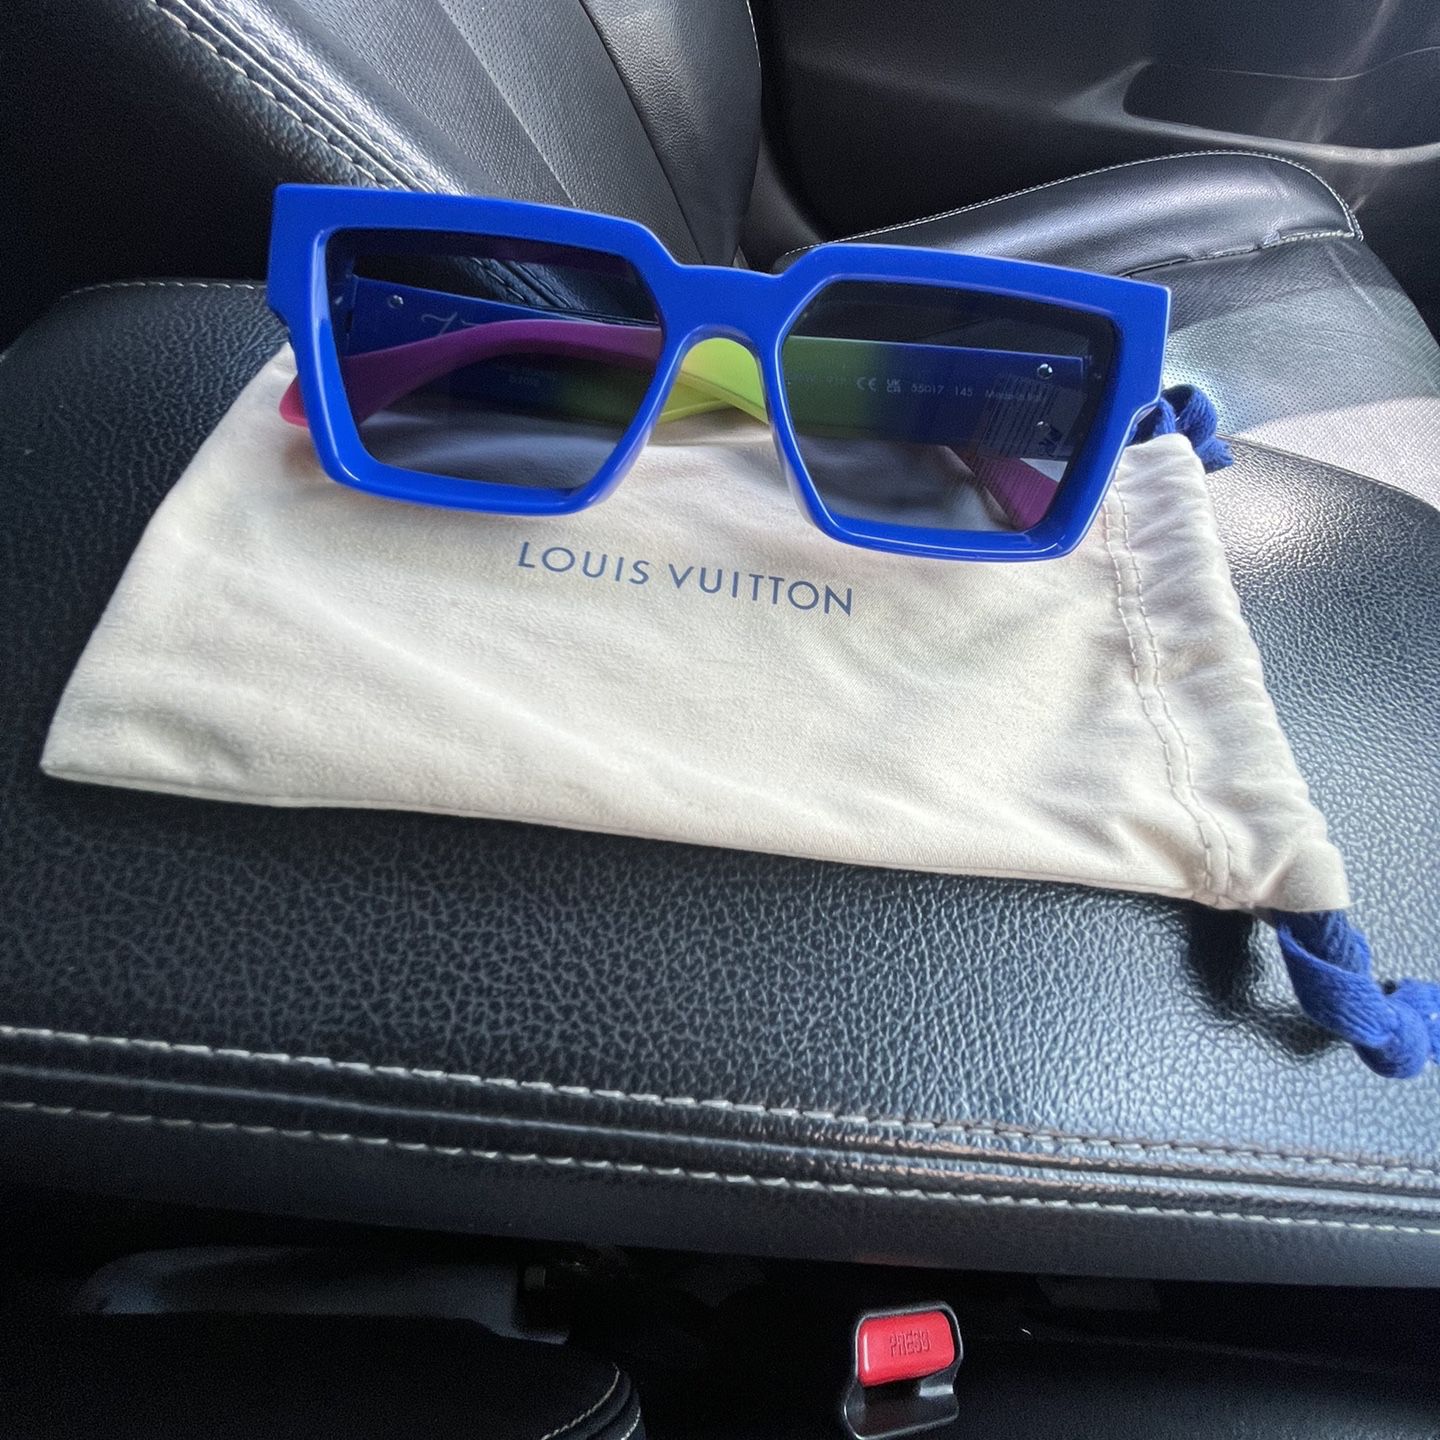 Louis Vuitton 1.1 Millionaires Square Sunglasses for Sale in Hicksville, NY  - OfferUp